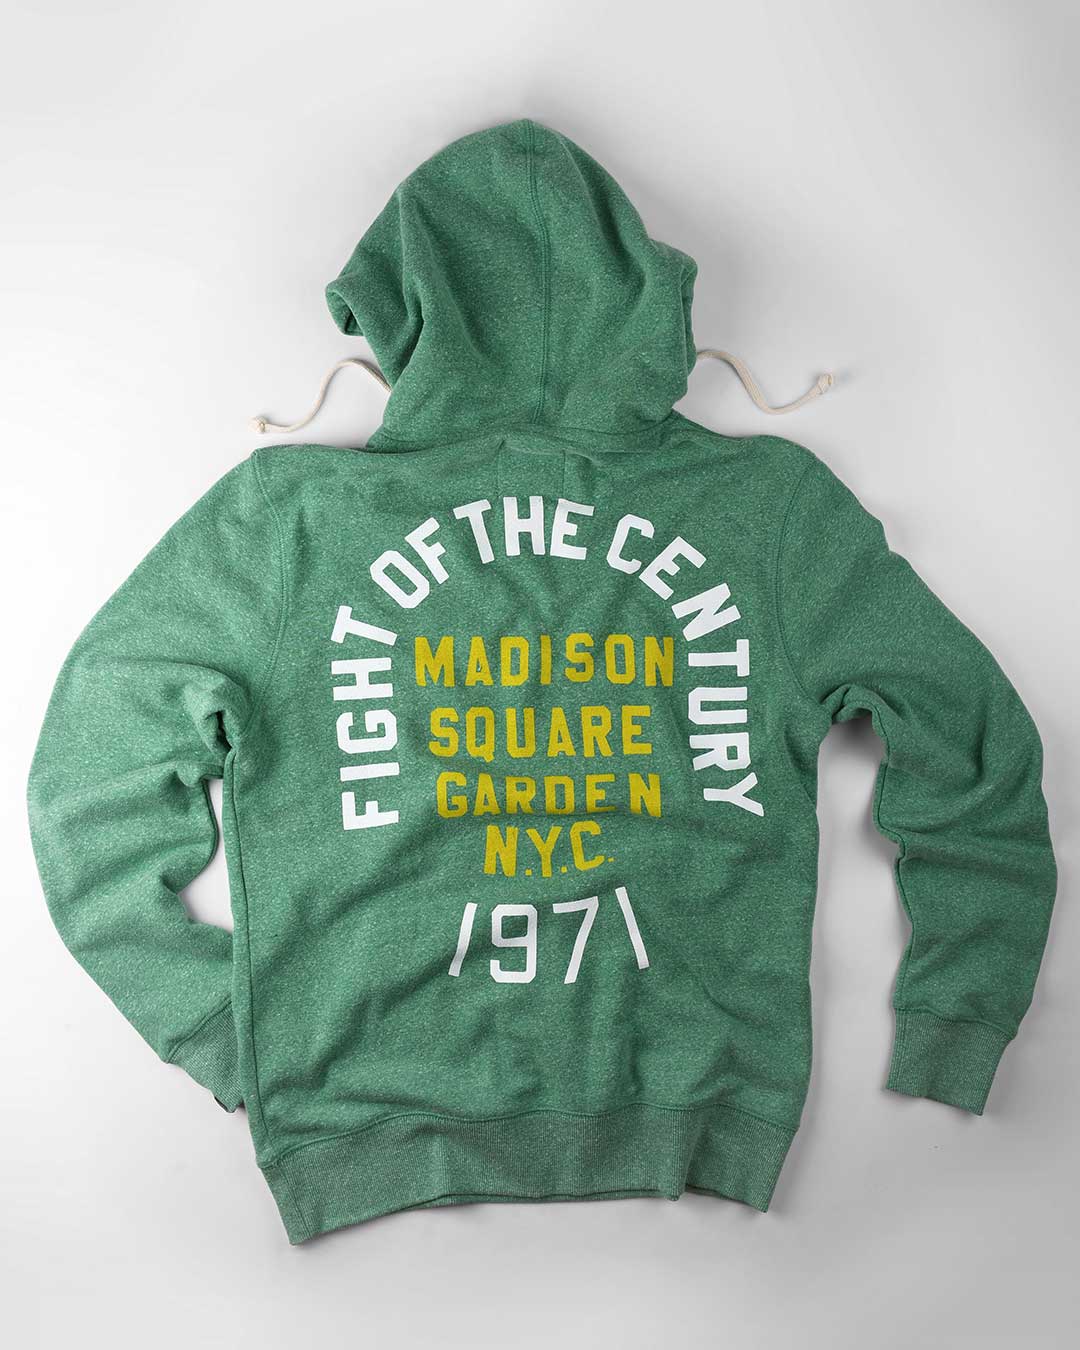 FOTC - Frazier 1971 MSG Green Hoody - Roots of Fight